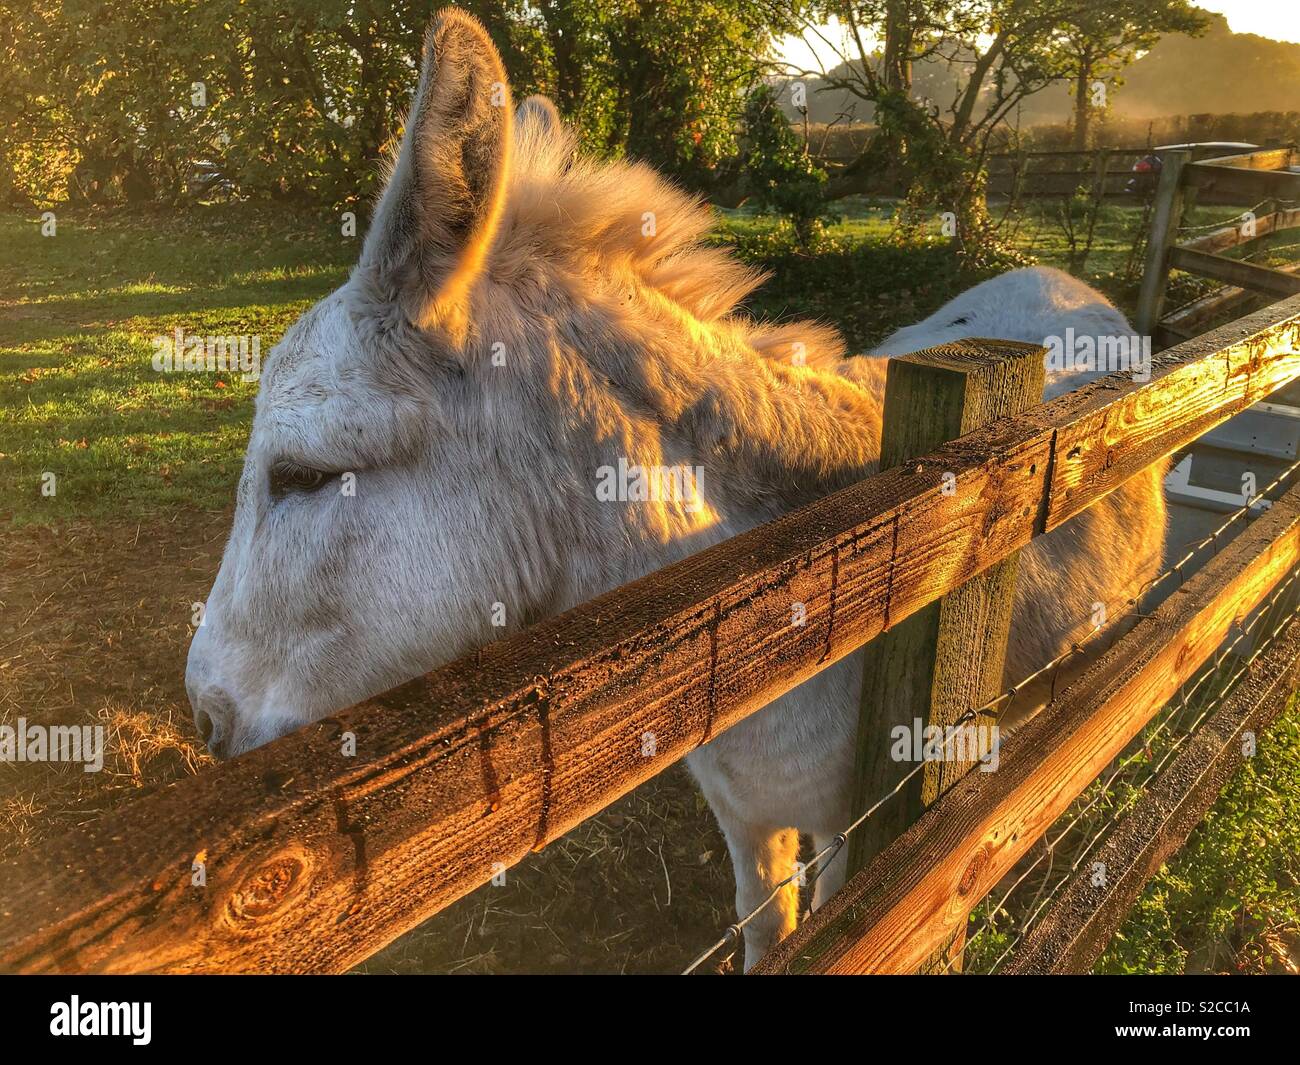 Donkey standing by a fence, early morning Stock Photo